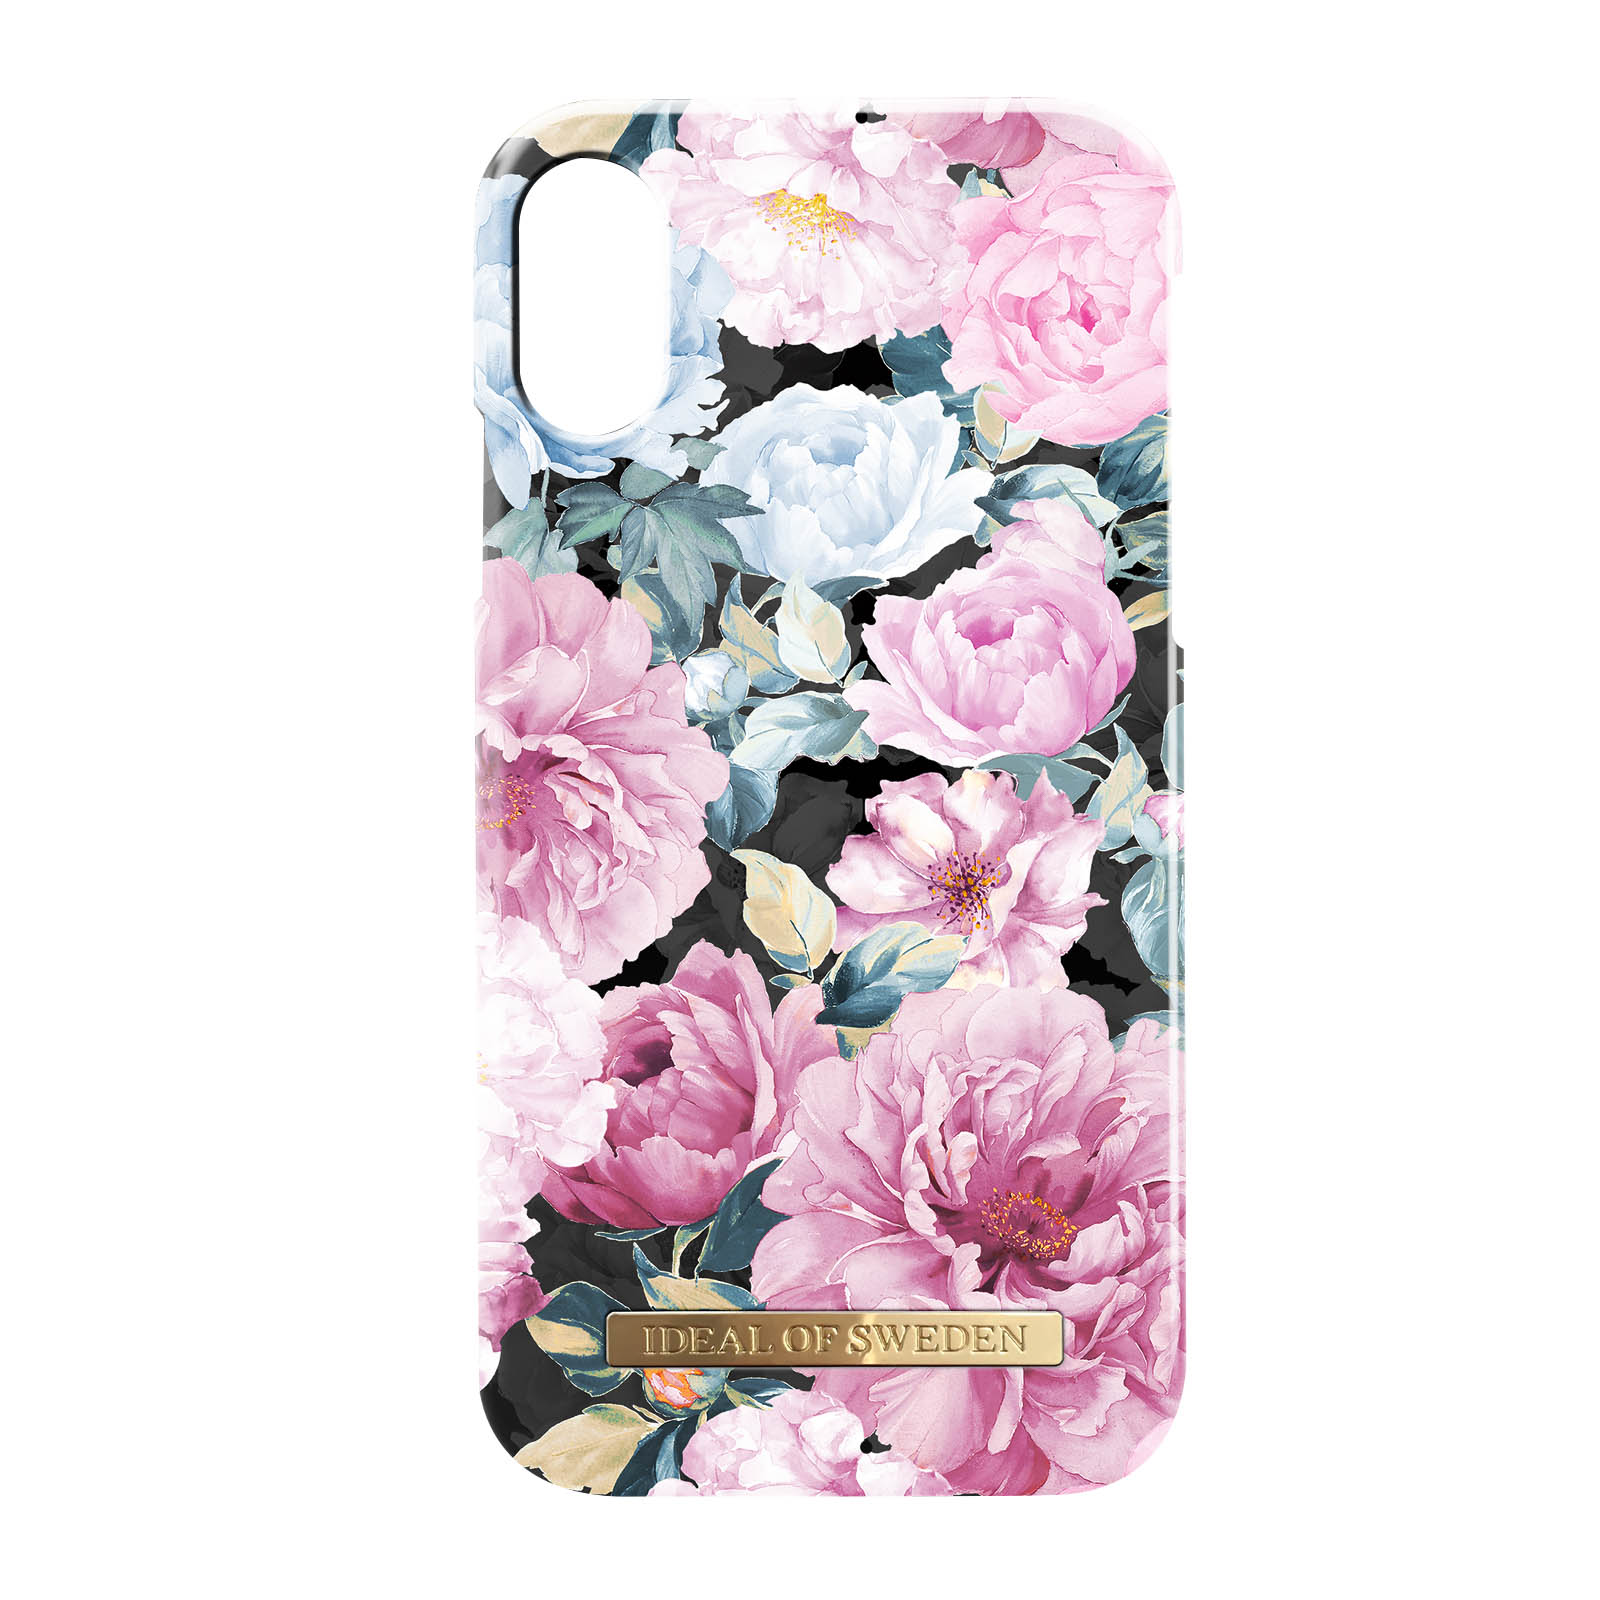 XS, Peony Garden iPhone Hülle Backcover, SWEDEN Apple, IDEAL OF Series, Rosa